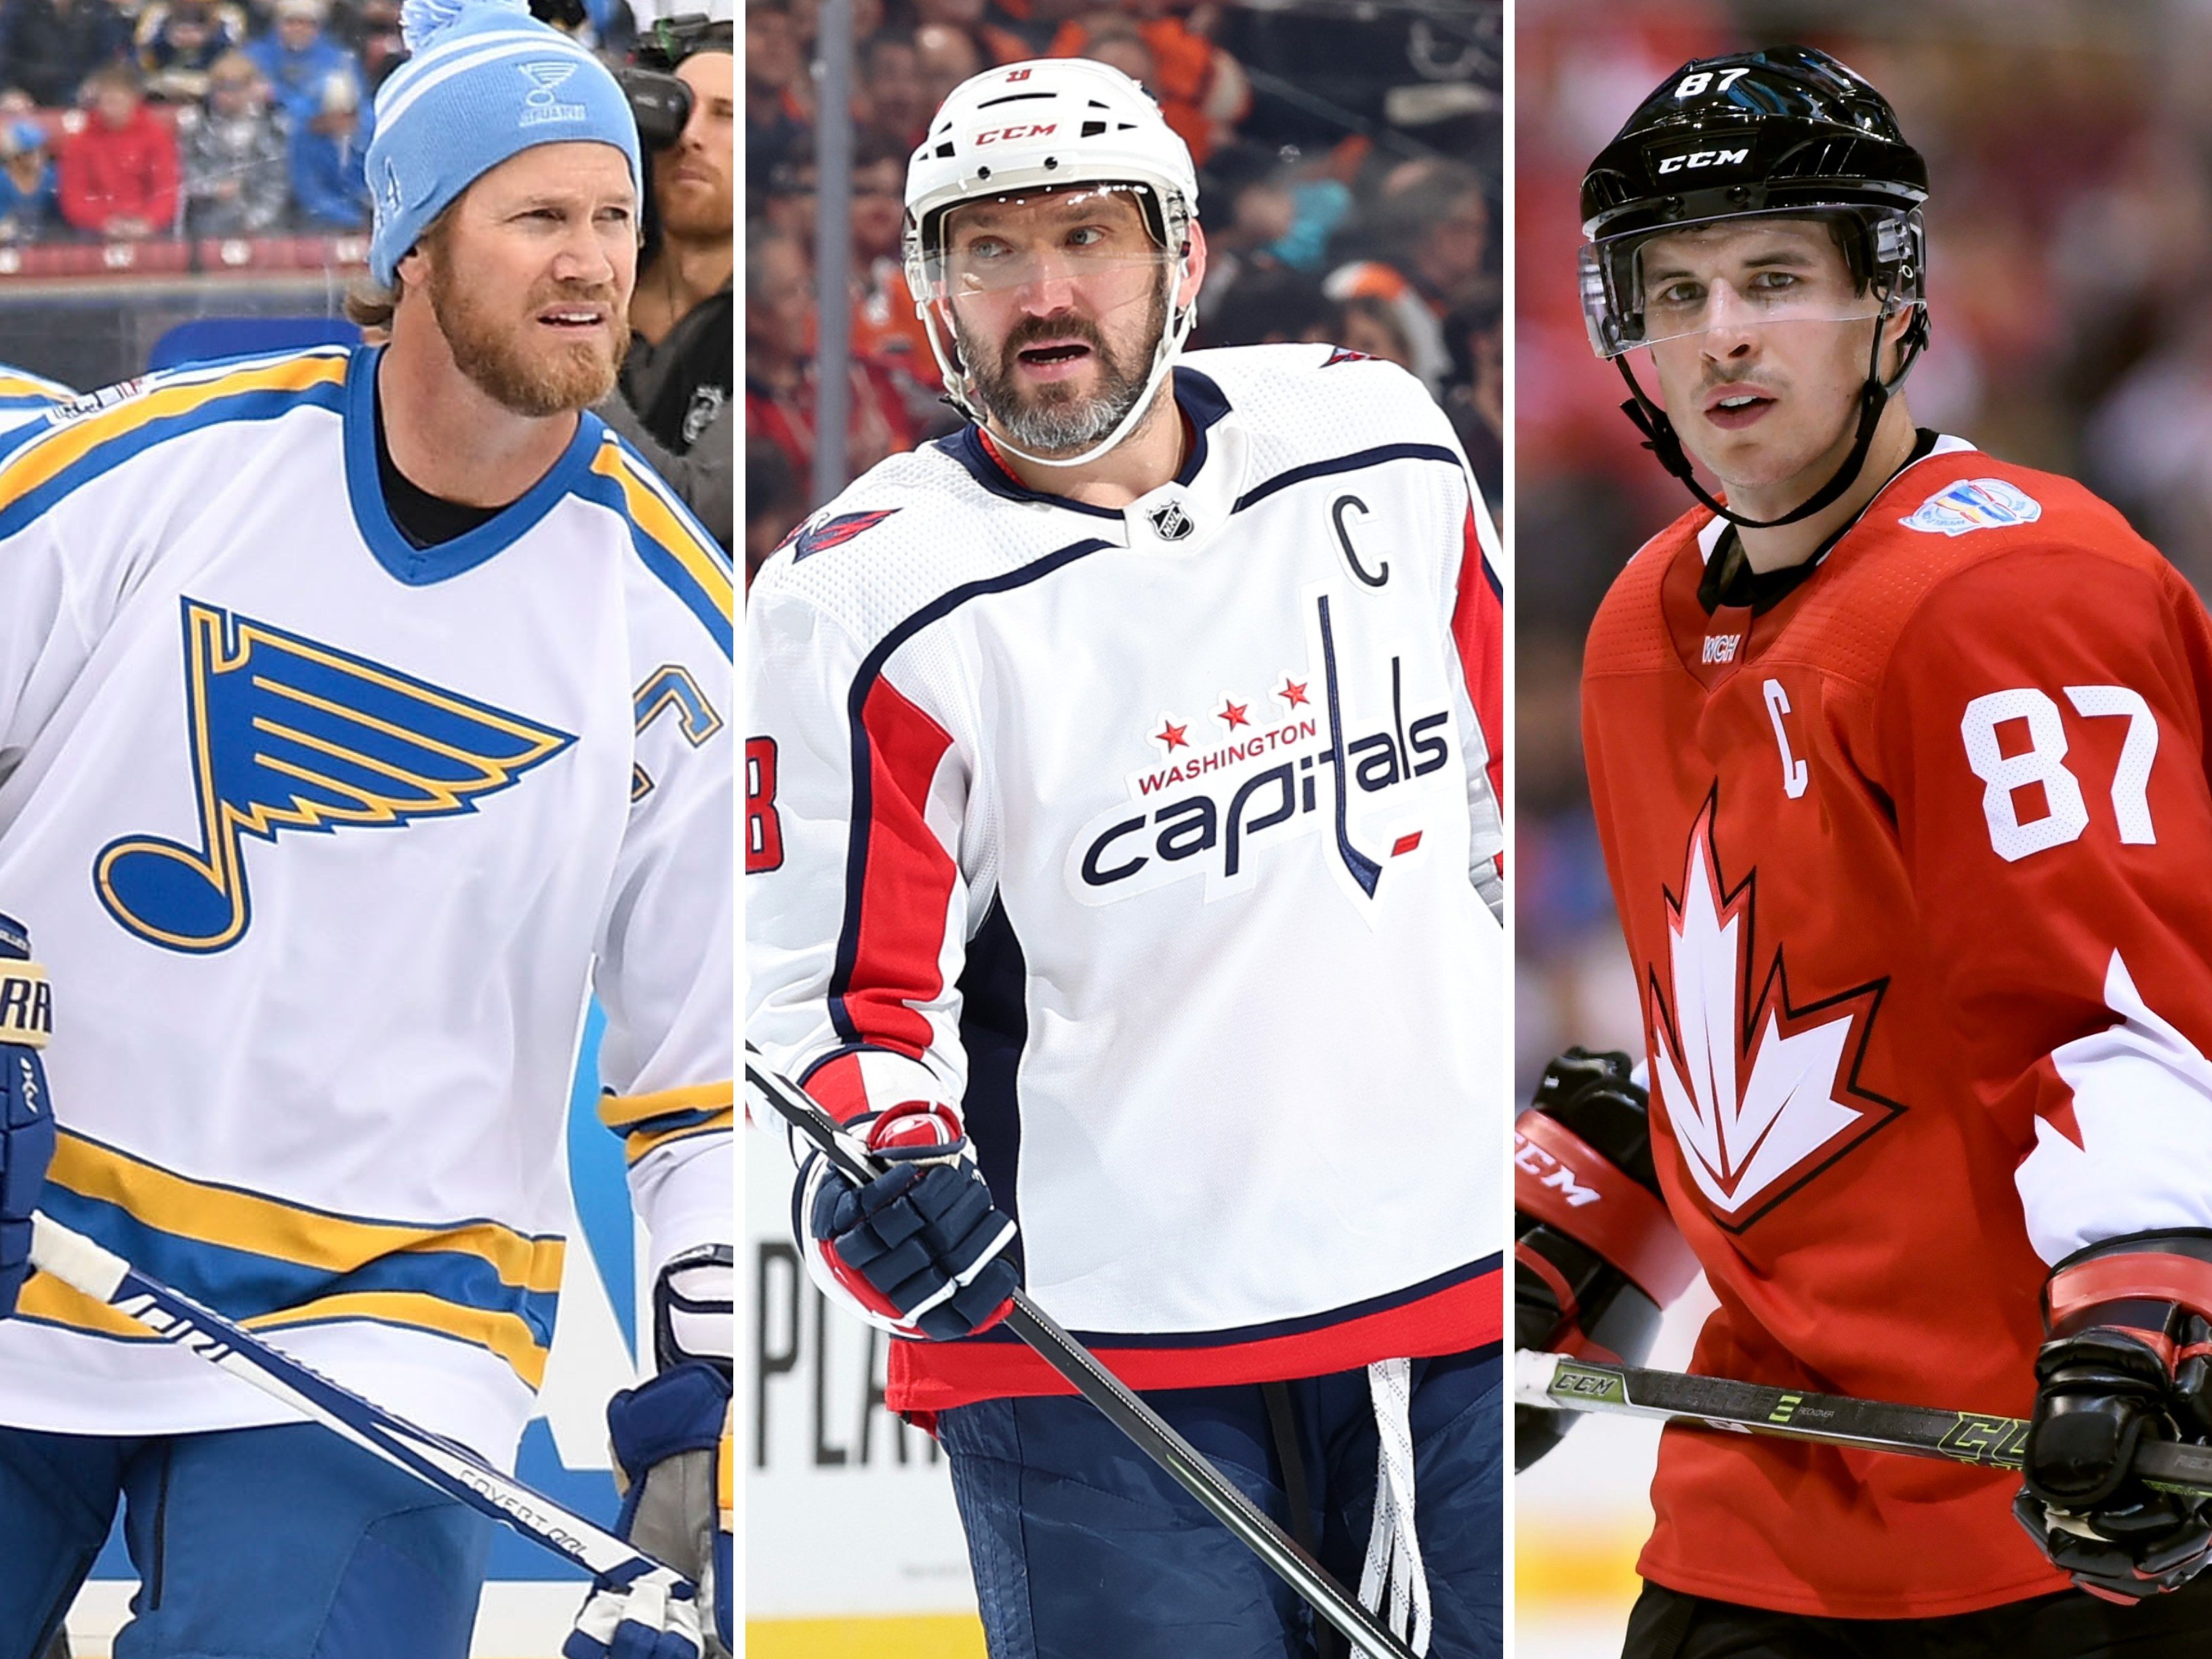 NHL players including Chris Pronger, Alexander Ovechkin and Sidney Crosby make bank both on and off the ice. Photo: Getty Images/AP